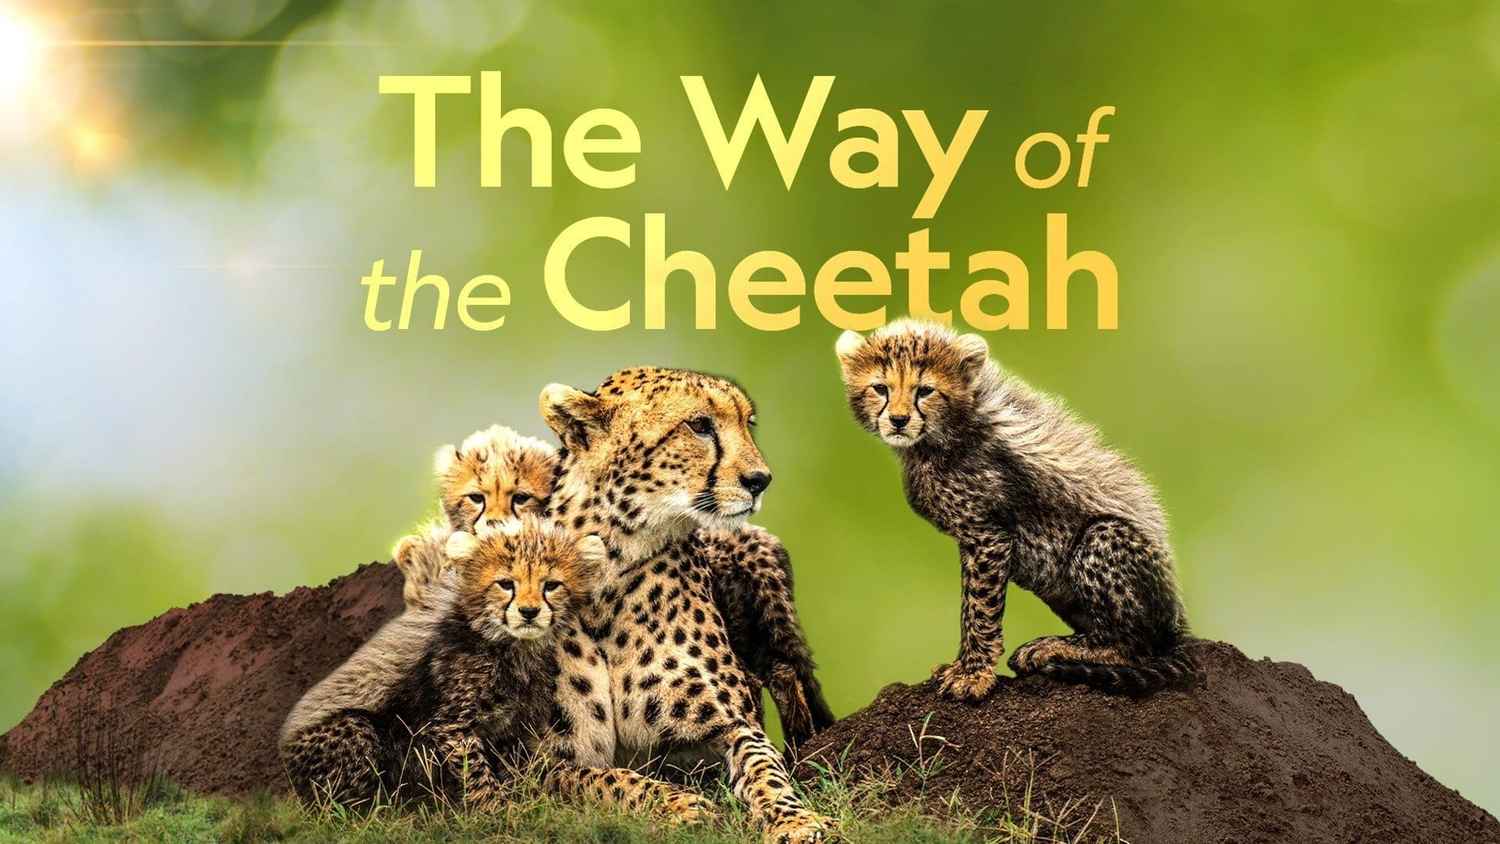 Watch The Way of the Cheetah Full Movie Online, Release Date, Trailer, Cast  and Songs | Documentary Film